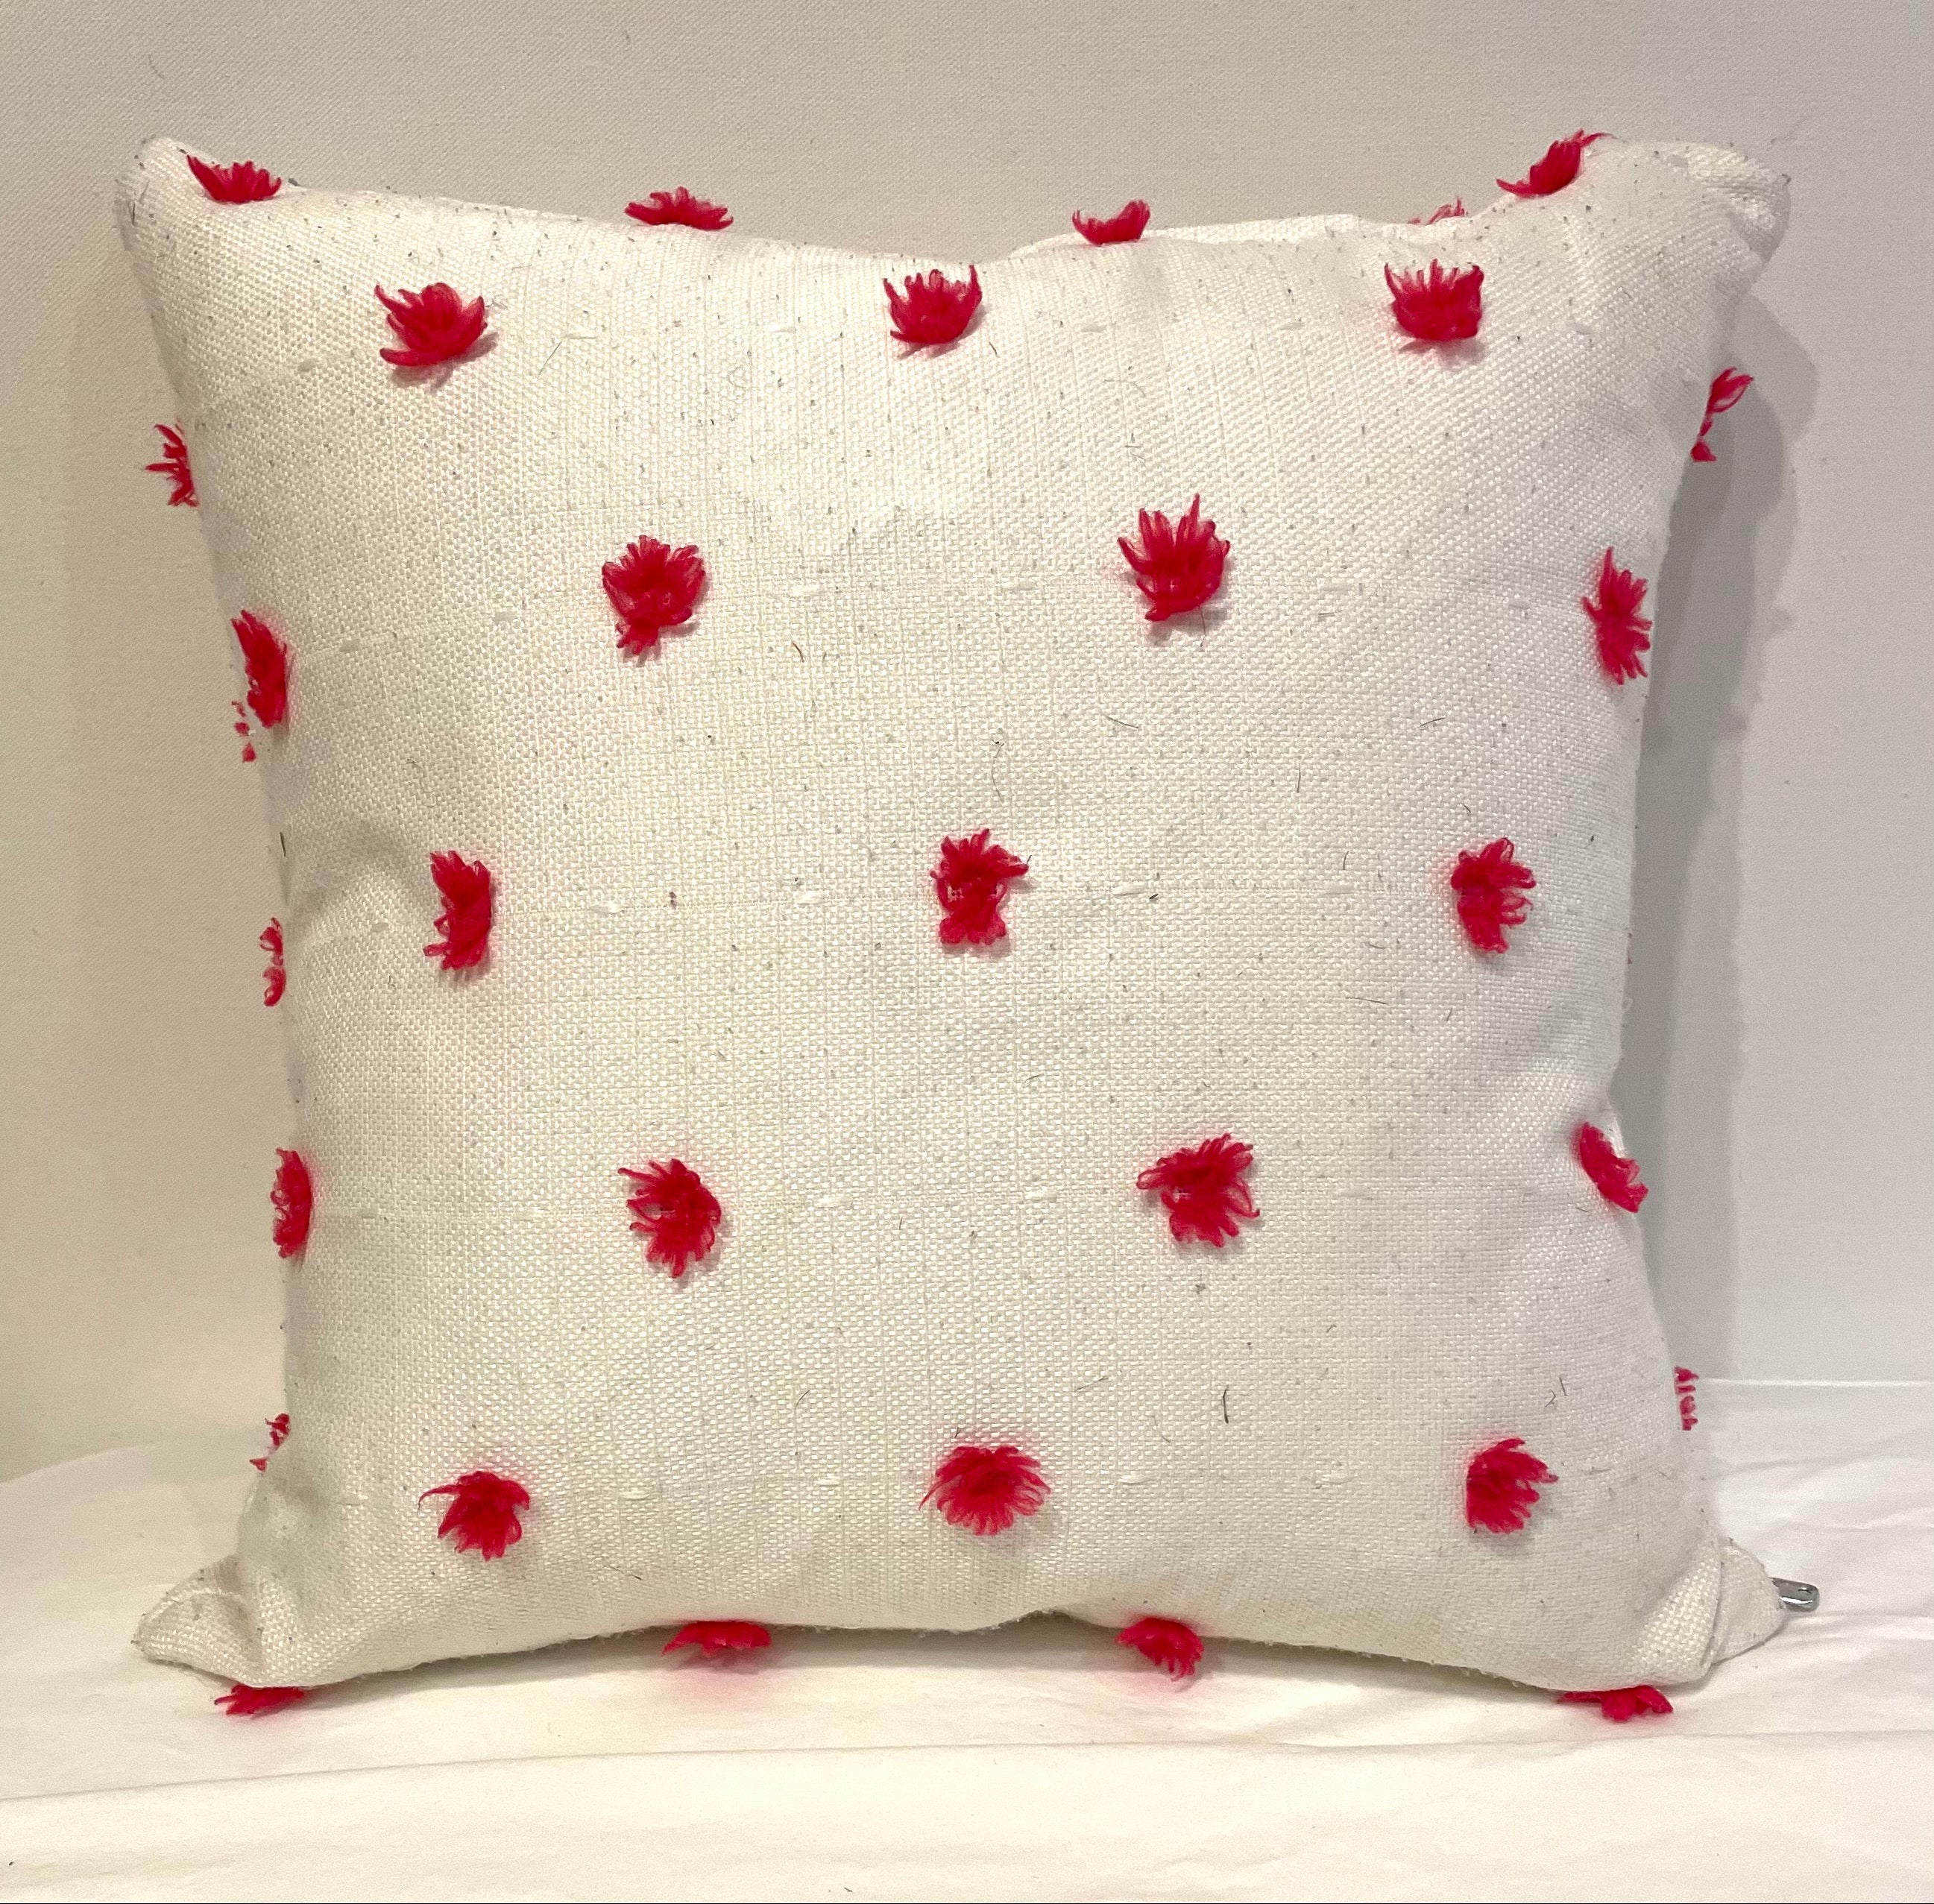 White Down Ethan Allen Pillow with Pink Yarn Bursts